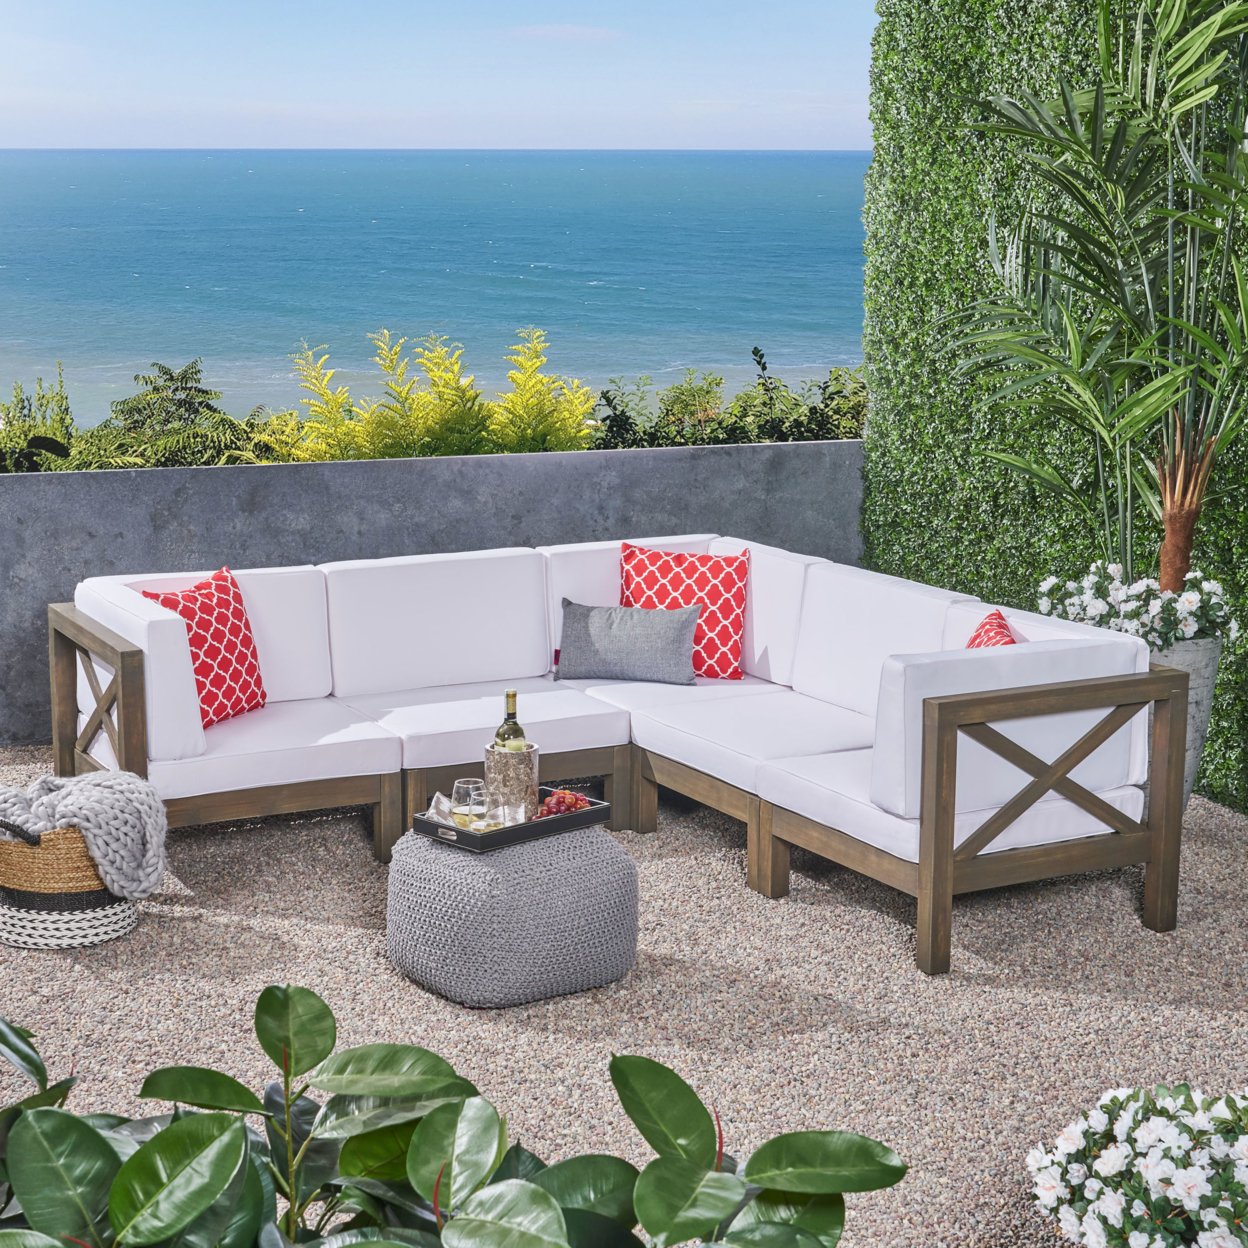 Great Deal Furniture Keith Outdoor Acacia Wood 5 Seater Sectional Sofa Set With Water-Resistant Cushions - White